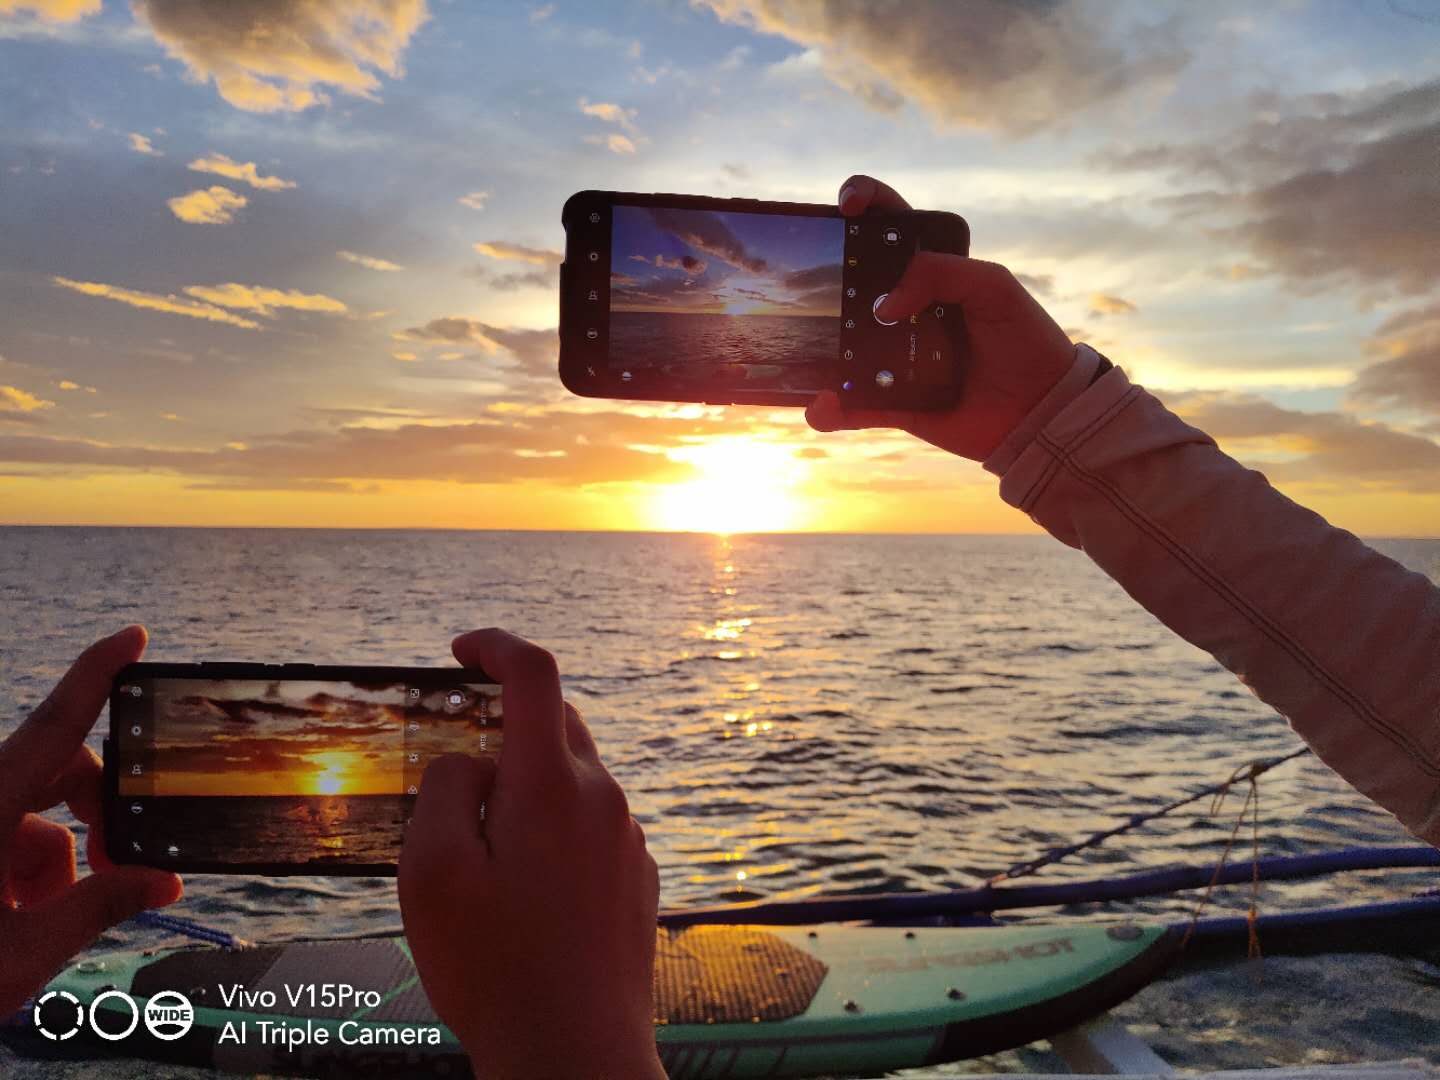 Street, landscape, or night photography? The Vivo V15 Pro lets you do all that